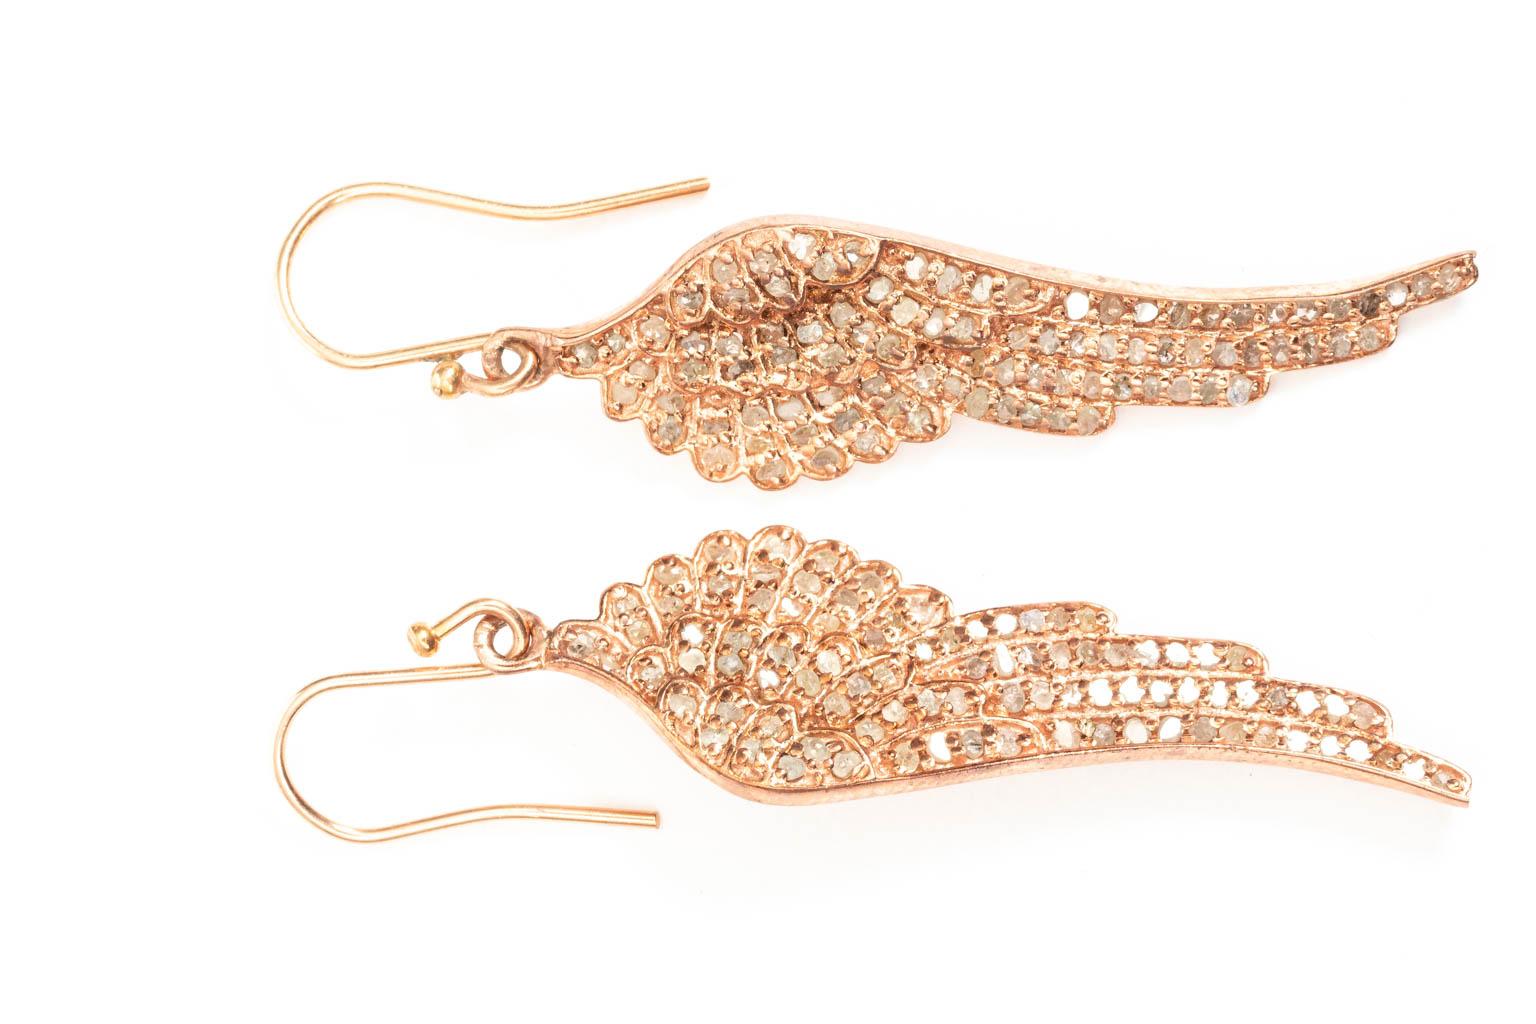 Matched pair of pink gold vermeil and pave rose cut diamond earrings on 14 karat pink gold ear wires in the Art Nouveau style. The piece also features pink gold plated sterling silver. Made in the United States by Katherine Wallach.